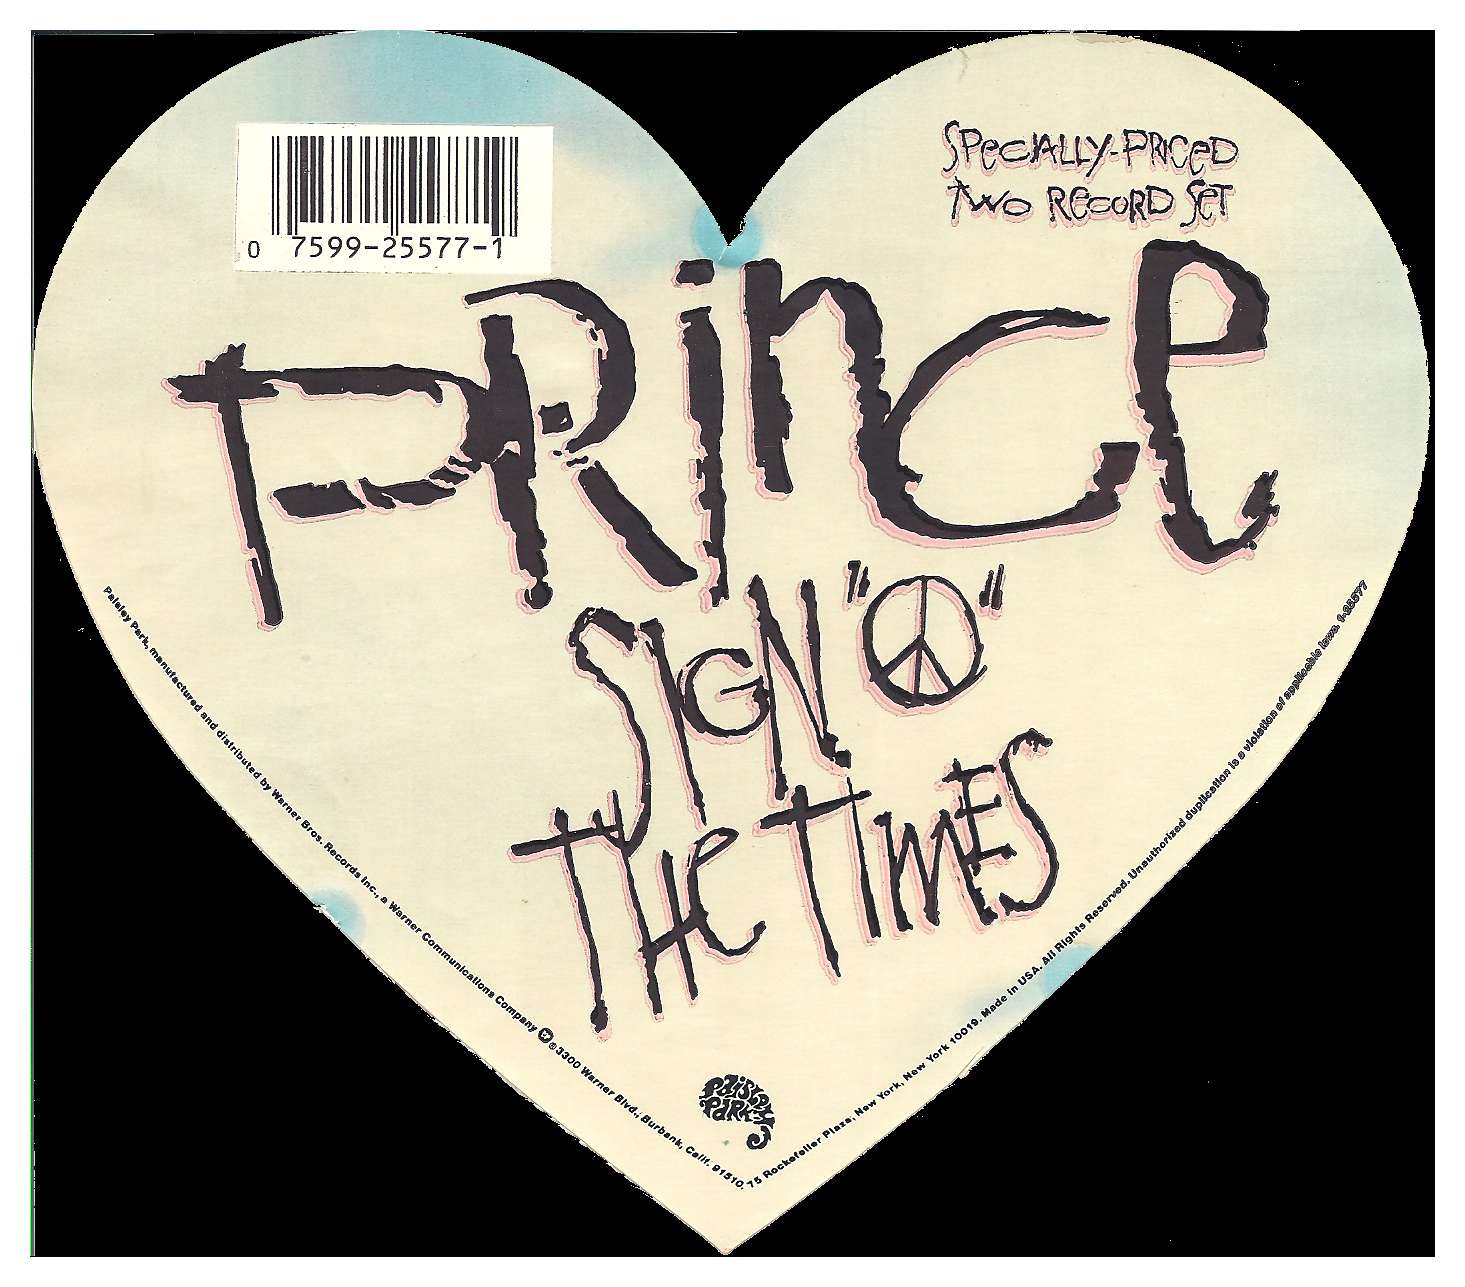 prince-sogn-of-the-times-album-sticker.png